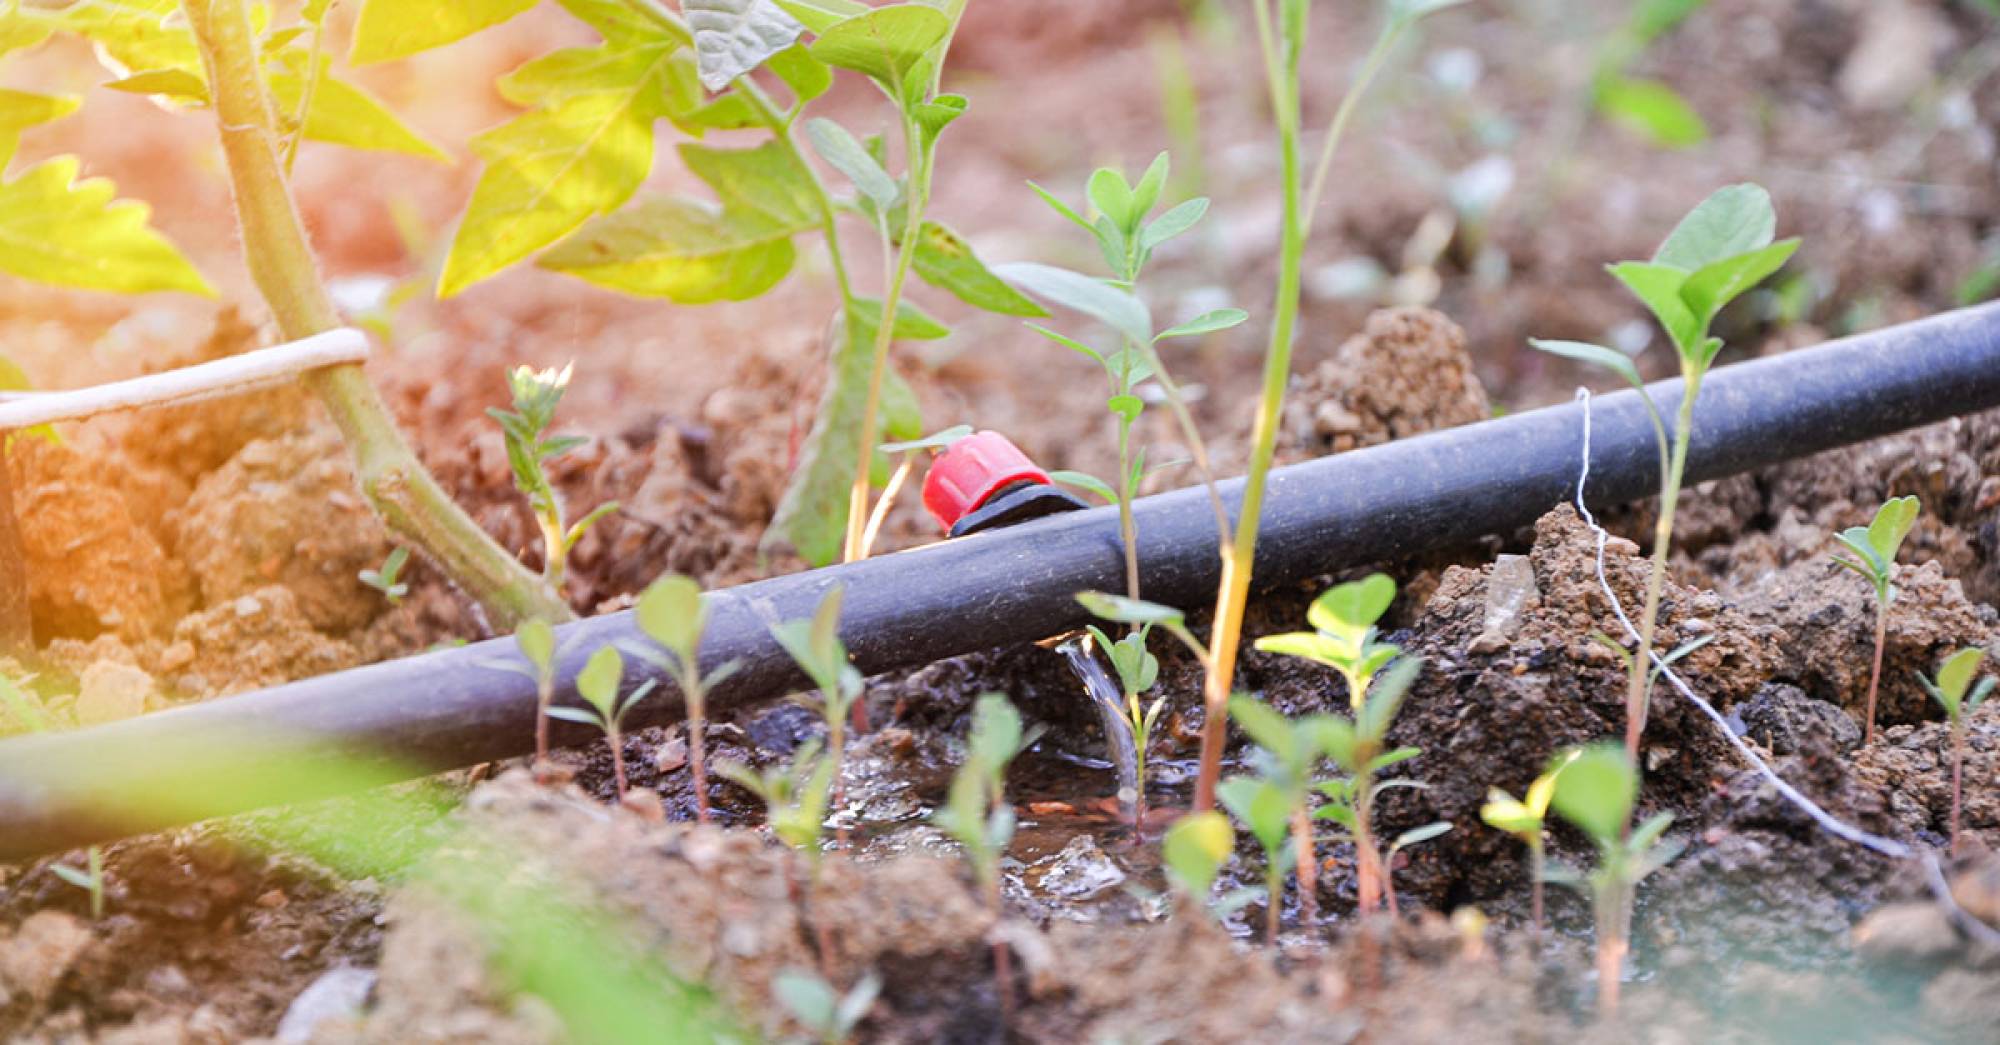 water-irrigation-header.jpg
The Vital Role of Water Irrigation and what you need to know